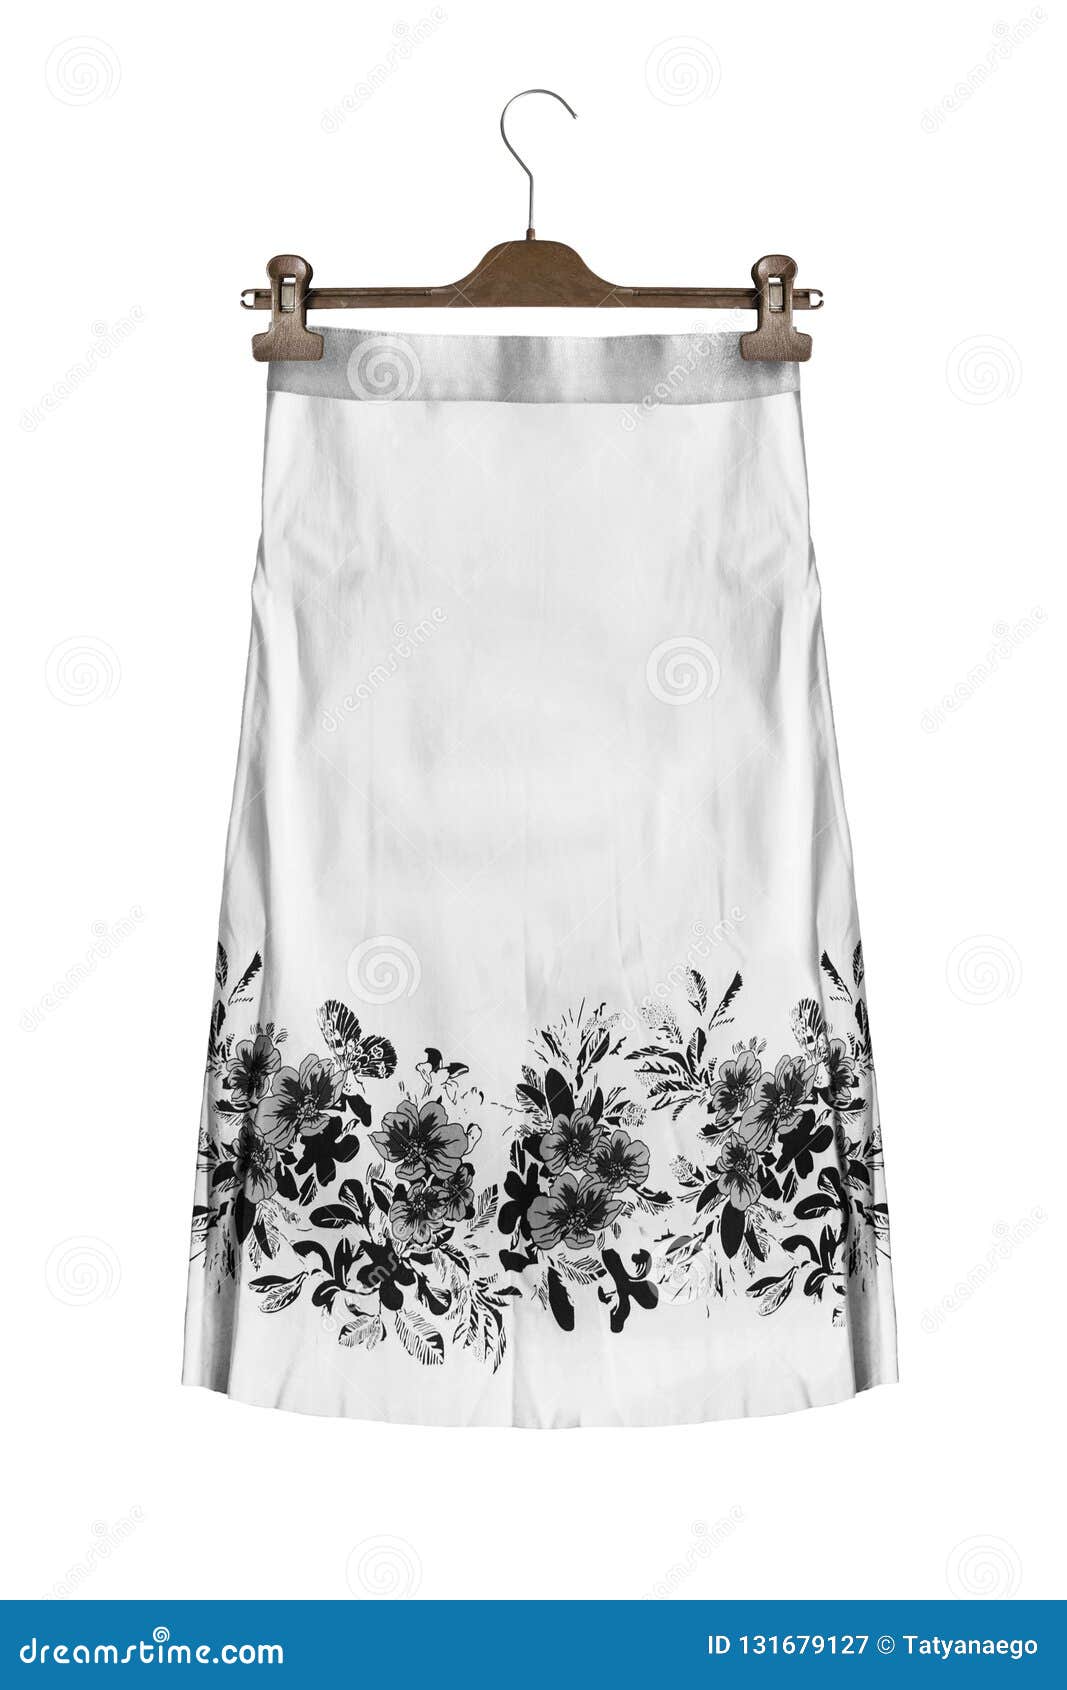 Skirt on clothes rack stock image. Image of lady, simplicity - 131679127